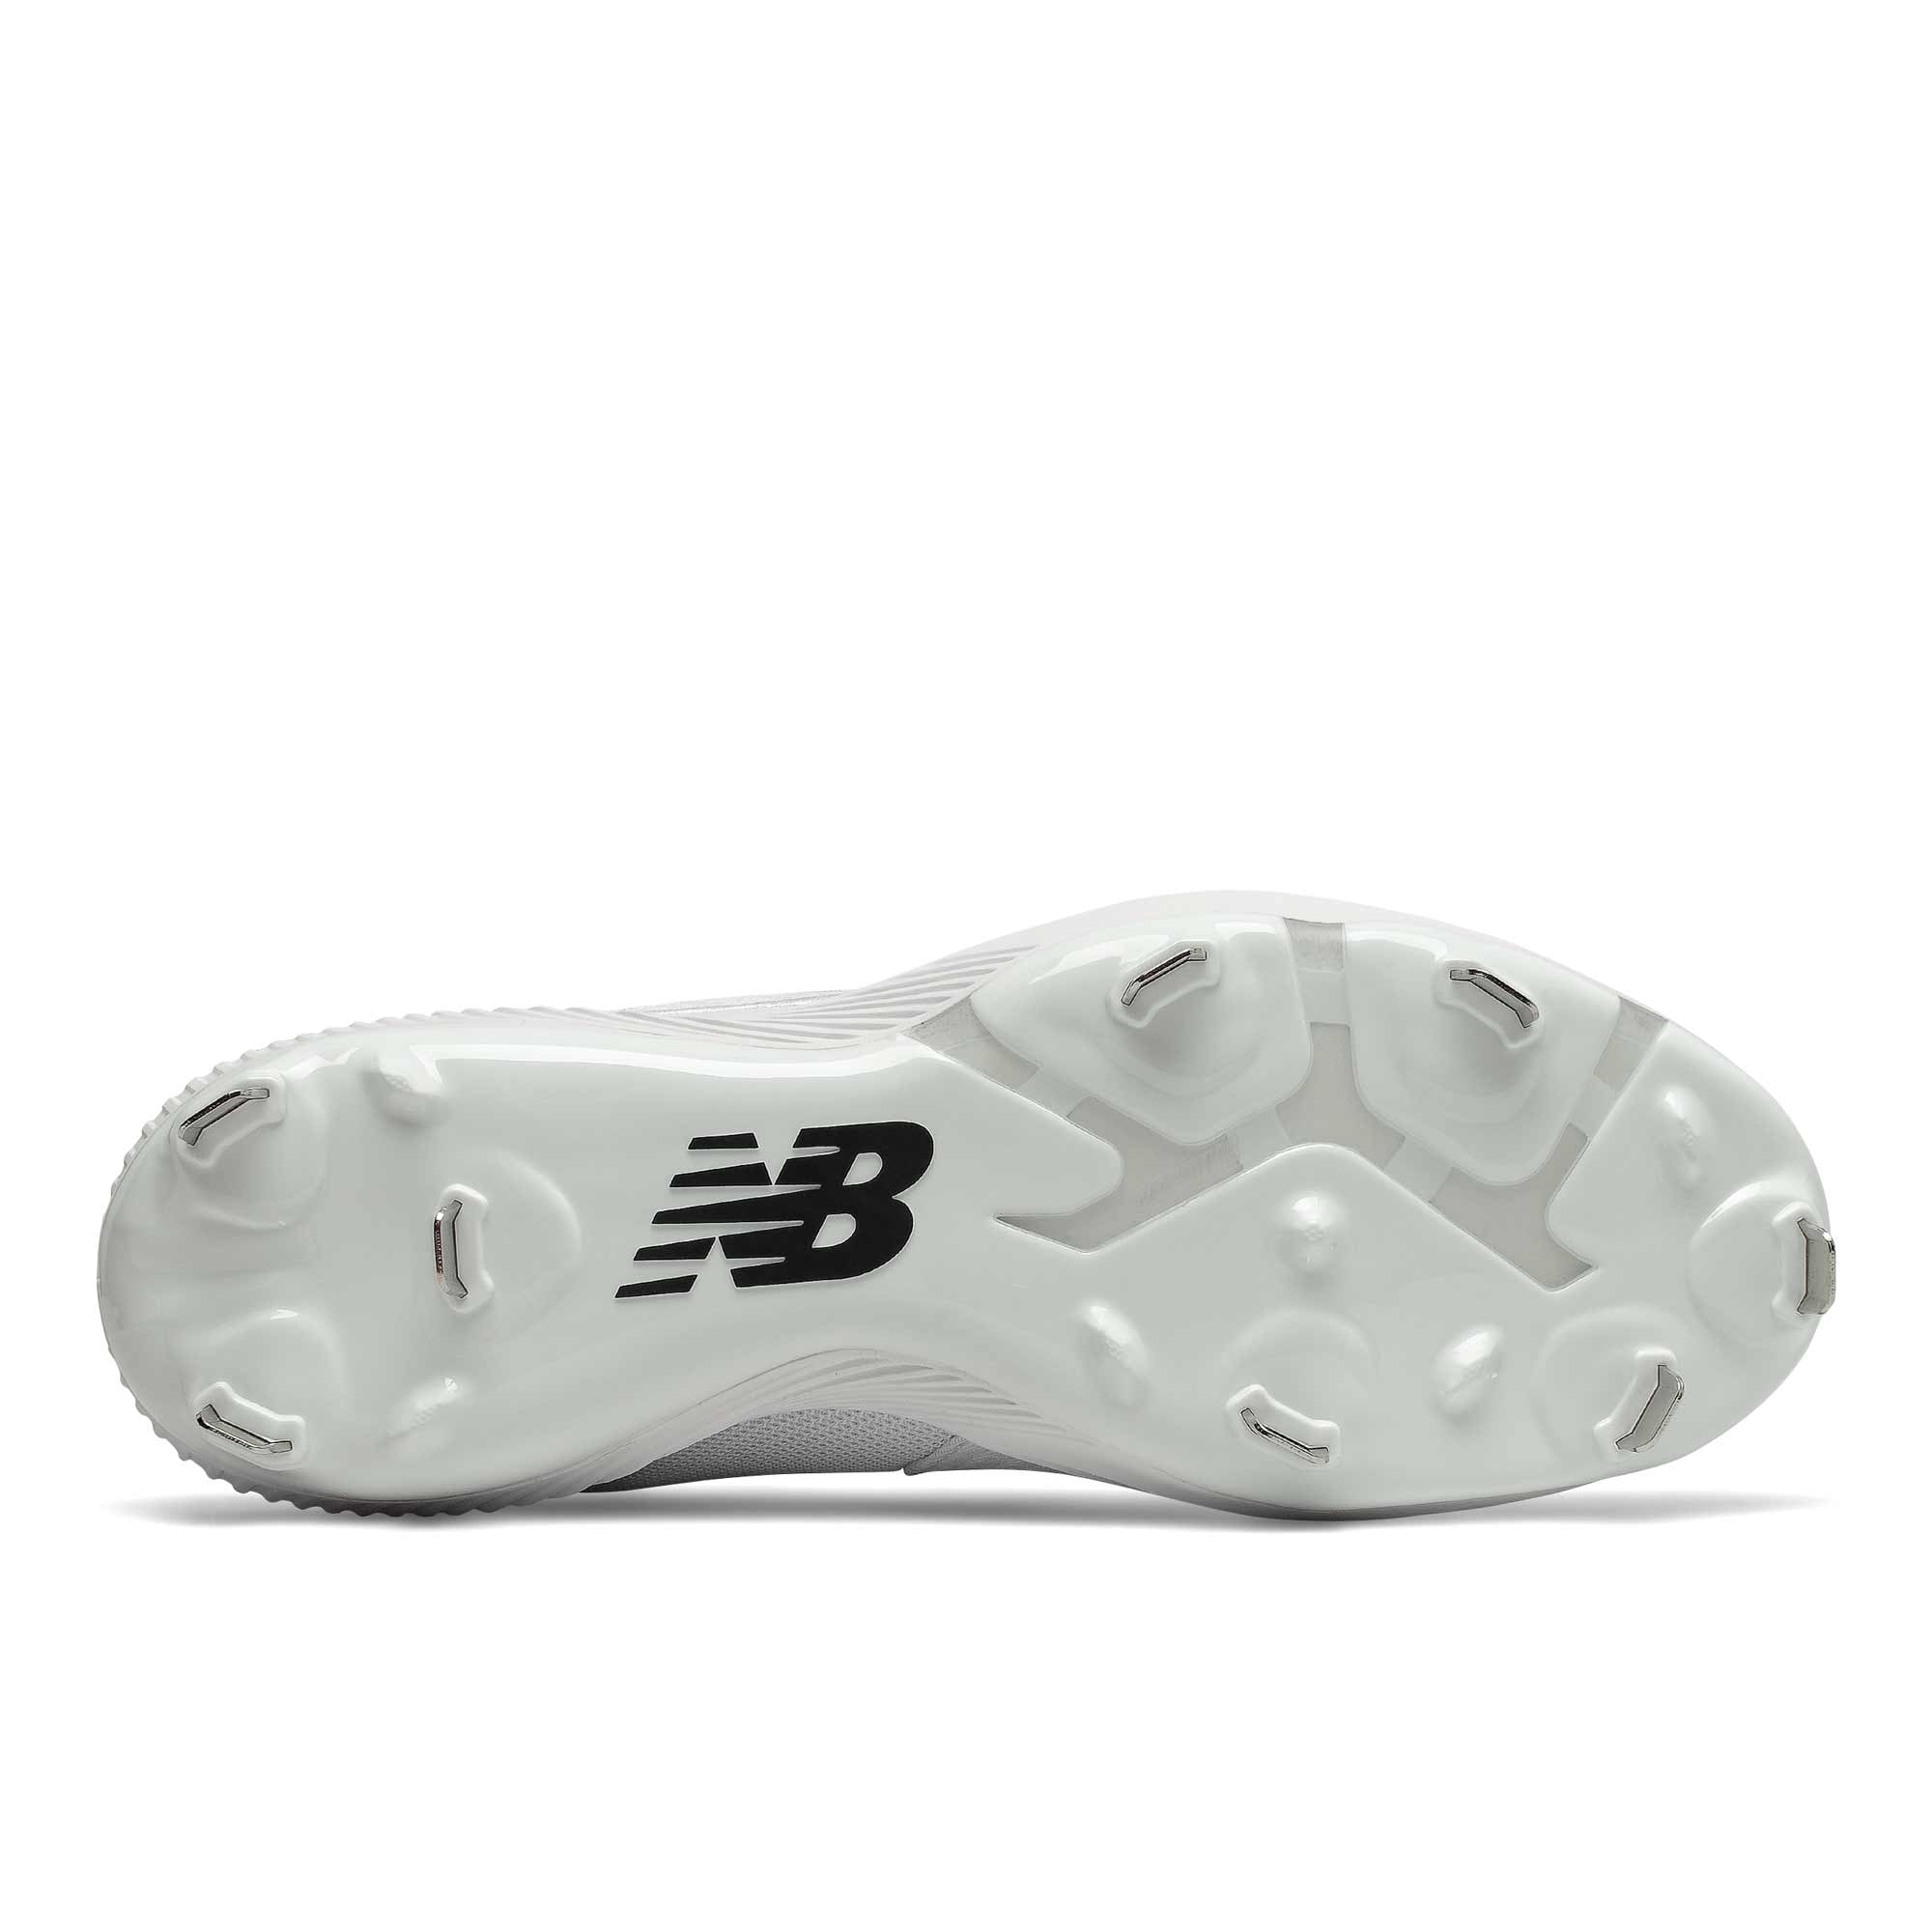 New Balance FuelCell L4040v6 Low Metal Baseball Cleat